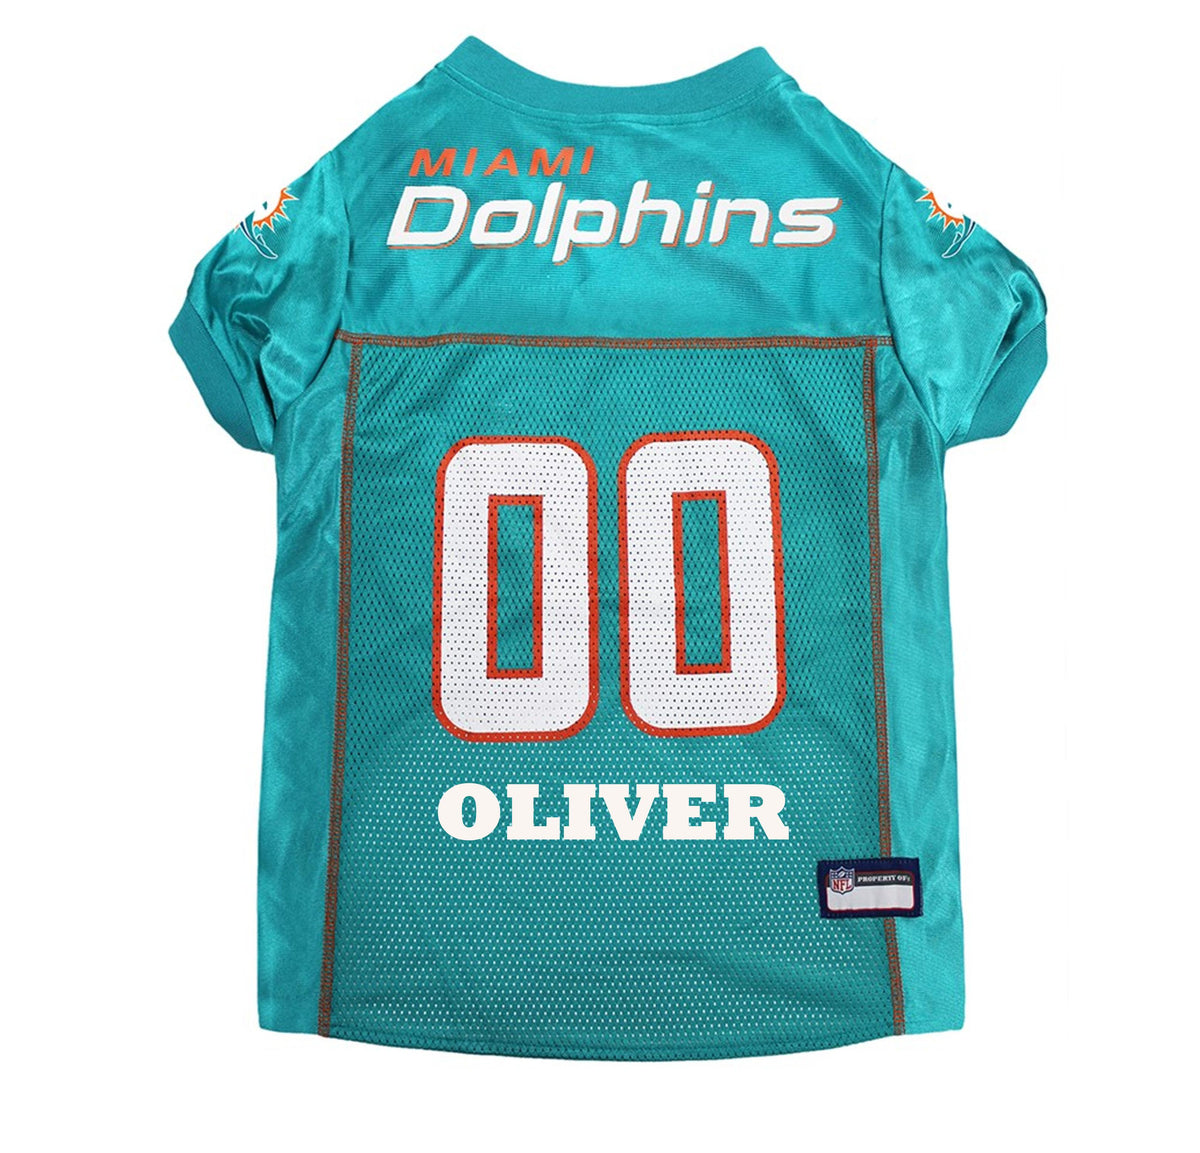 Miami Dolphins NFL Jersey Shopping Bag Tote